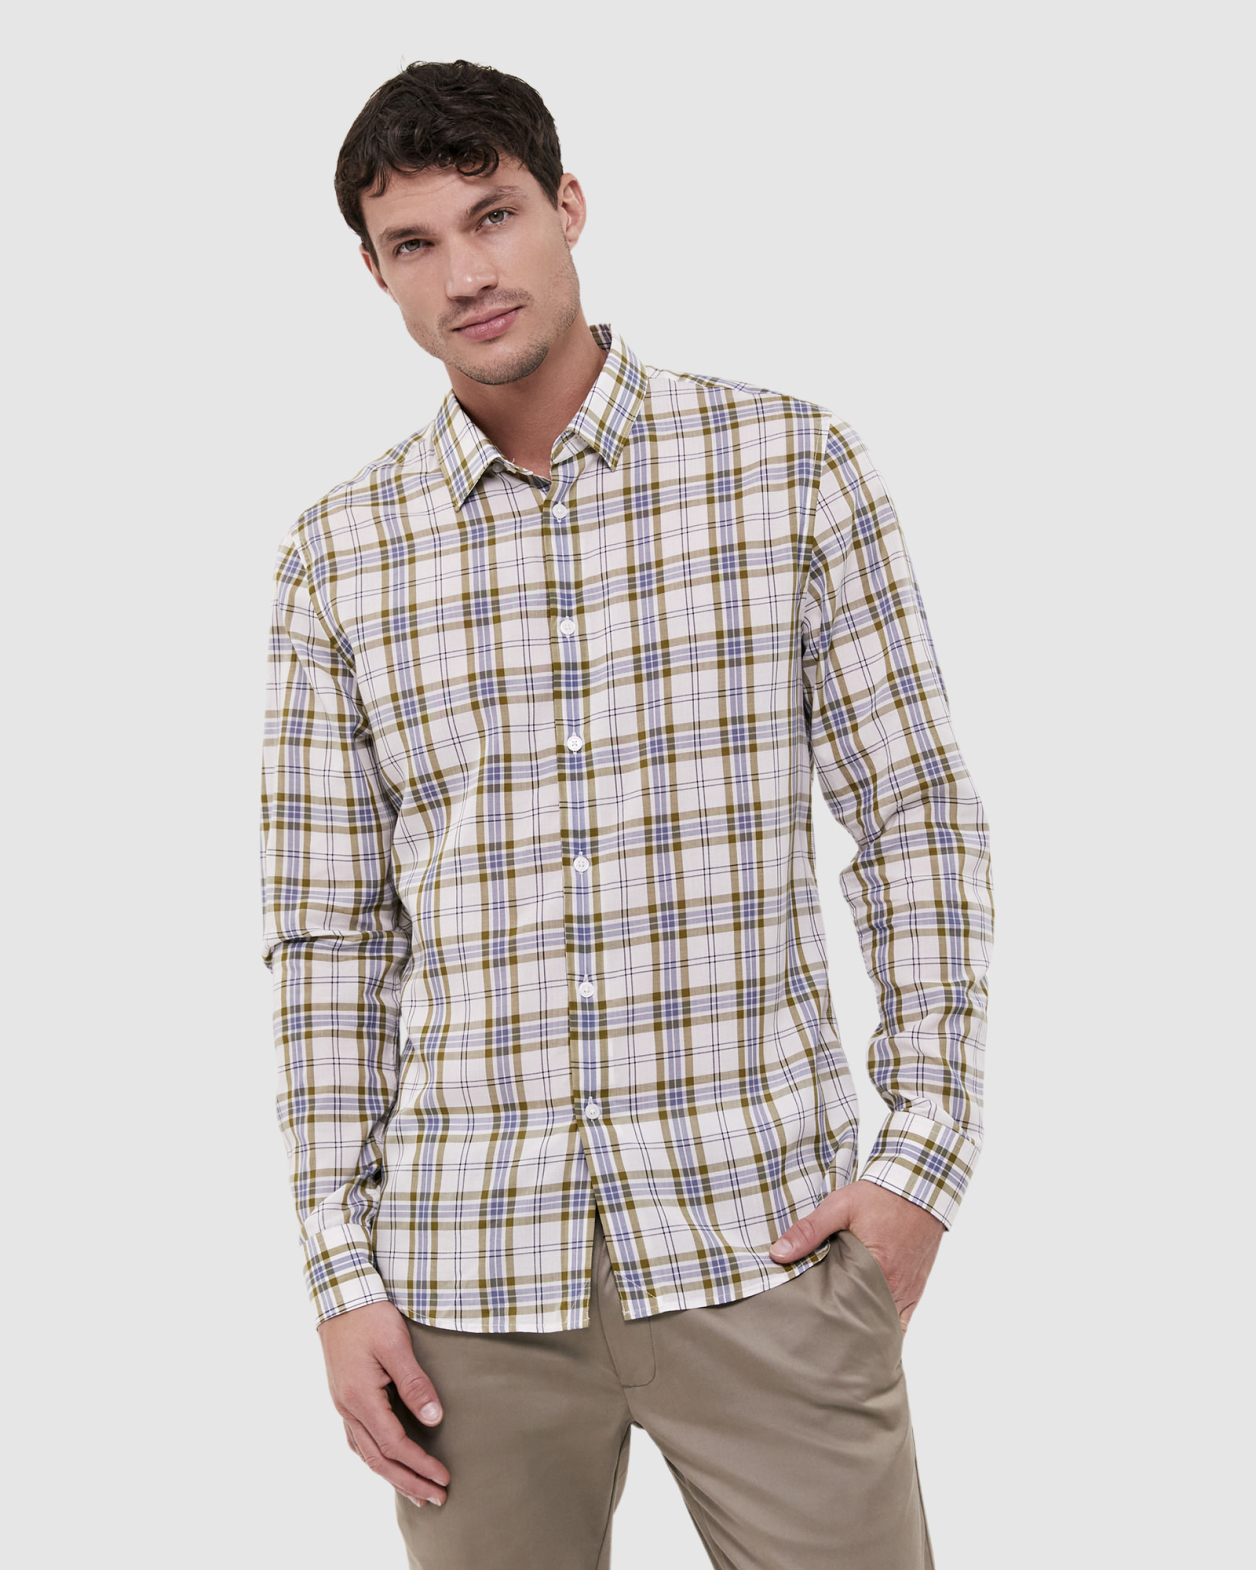 Kerrs Long Sleeve Classic Check Shirt in MOSS